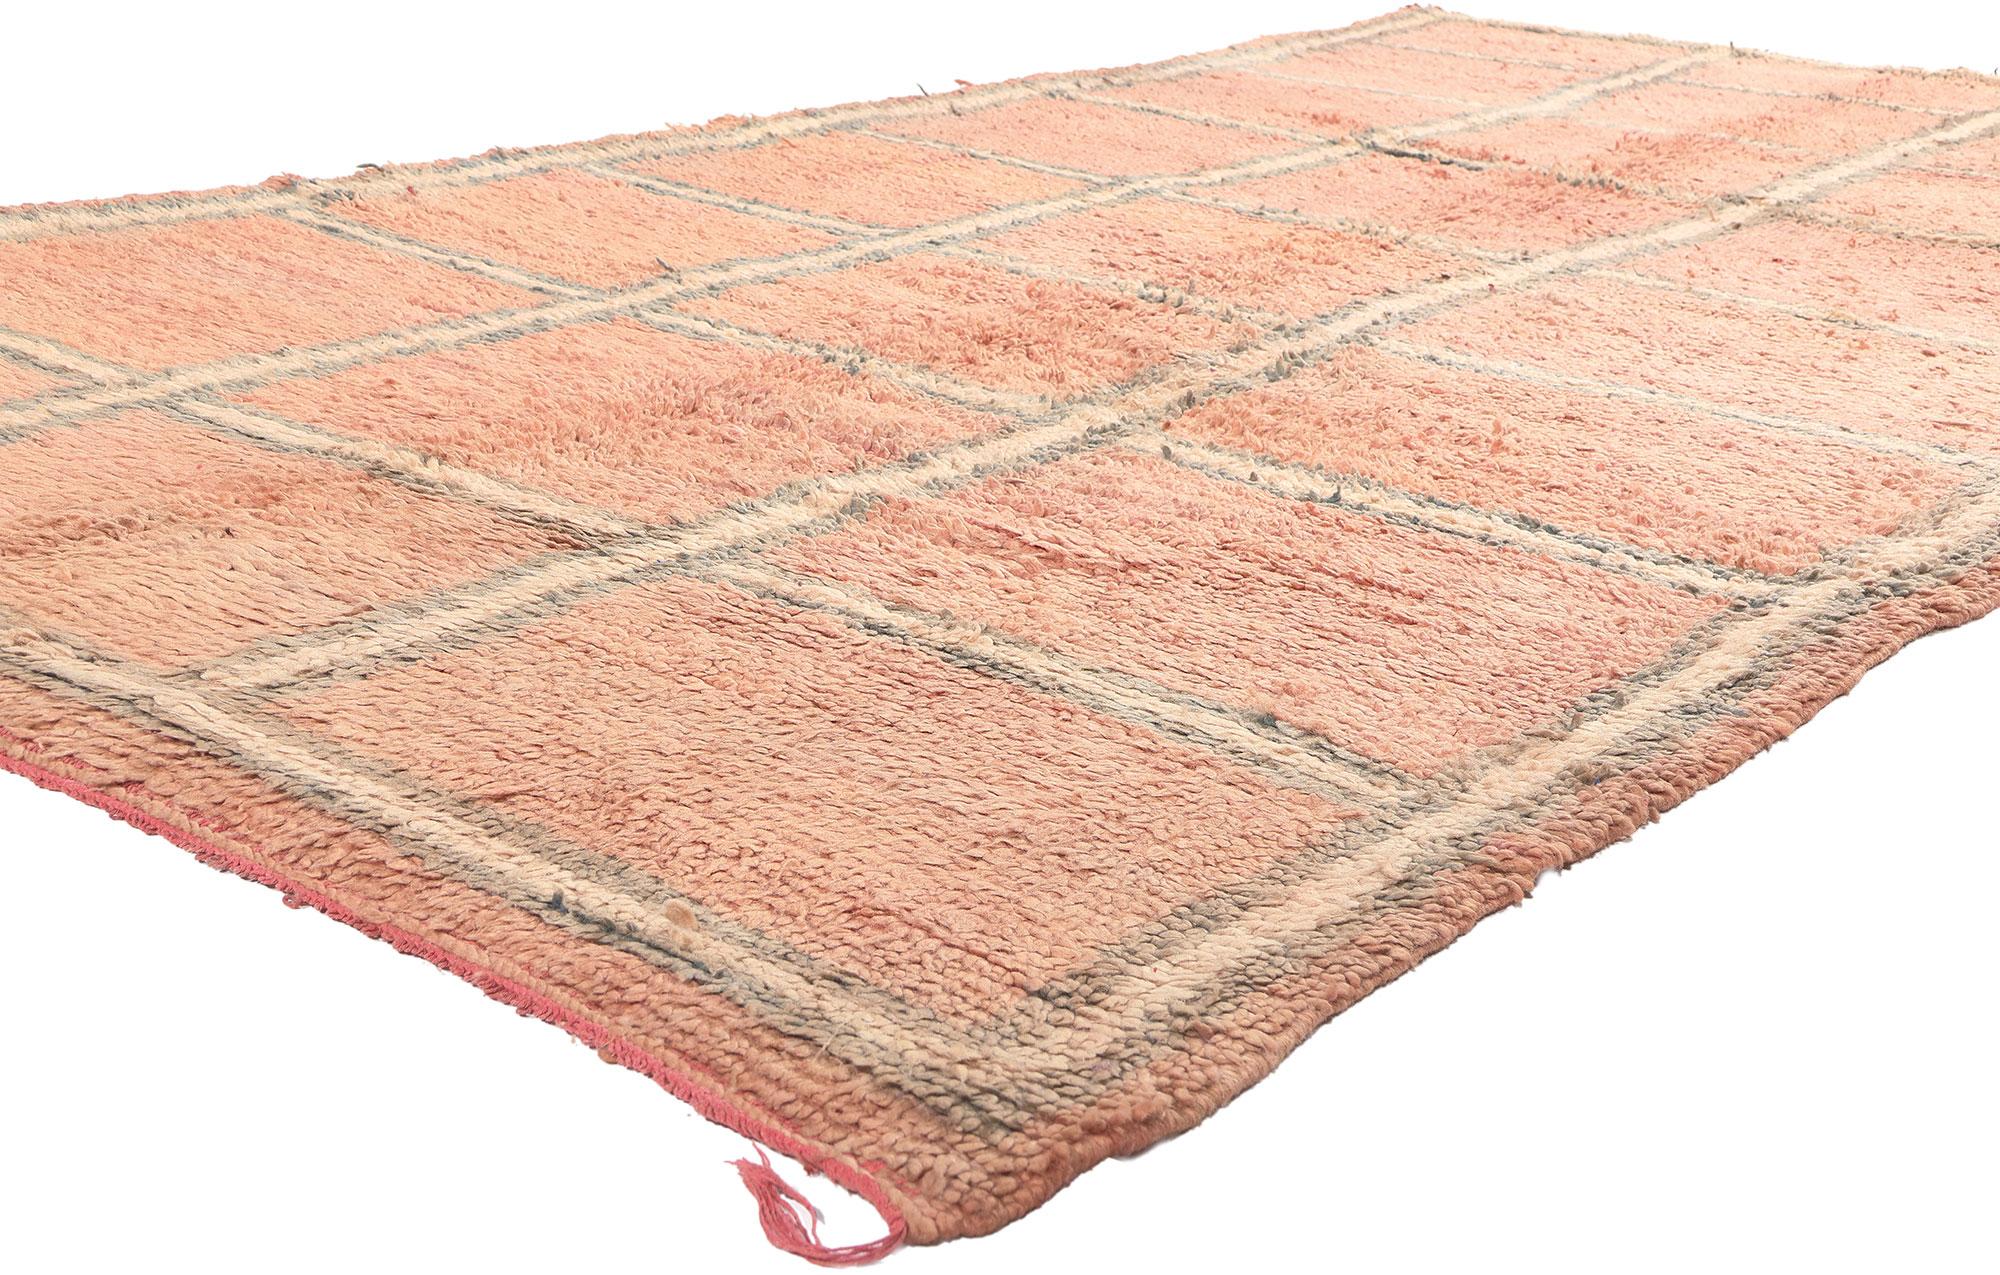 20950 Vintage Pink Boujad Moroccan Rug, 05'09 x 11'08. 

Originating from the vibrant city of Boujad, known for its eccentric and artistic designs, this vintage Boujad Moroccan rug transcends visual appeal. Step into the embrace of a cozy nomad,